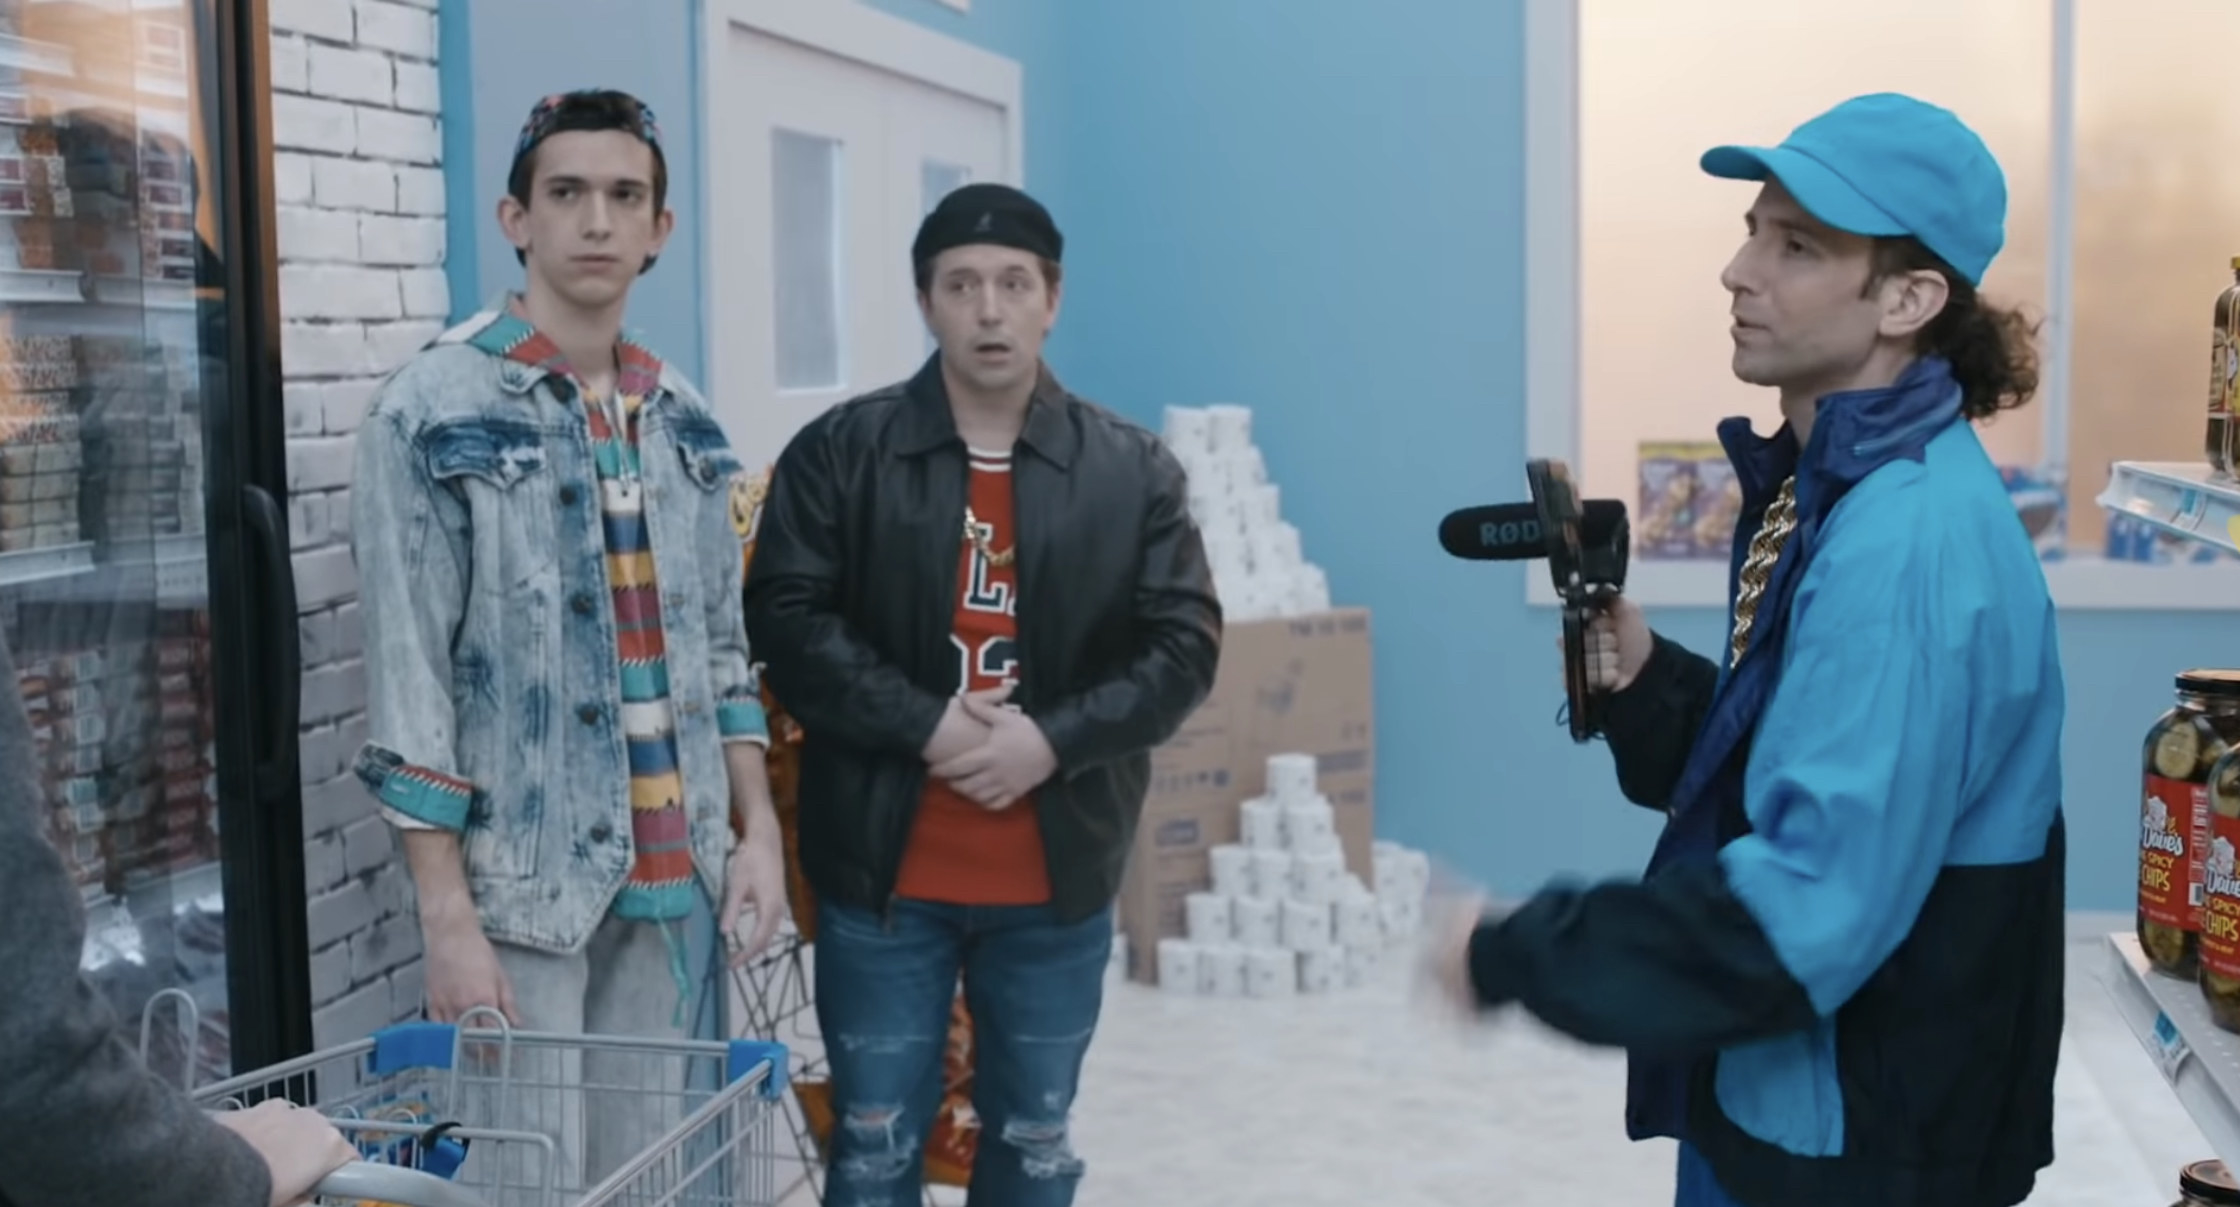 Kyle Mooney, Beck Bennett, and Andrew Dismukes stand in a grocery store wearing 80s-era hip hop clothes